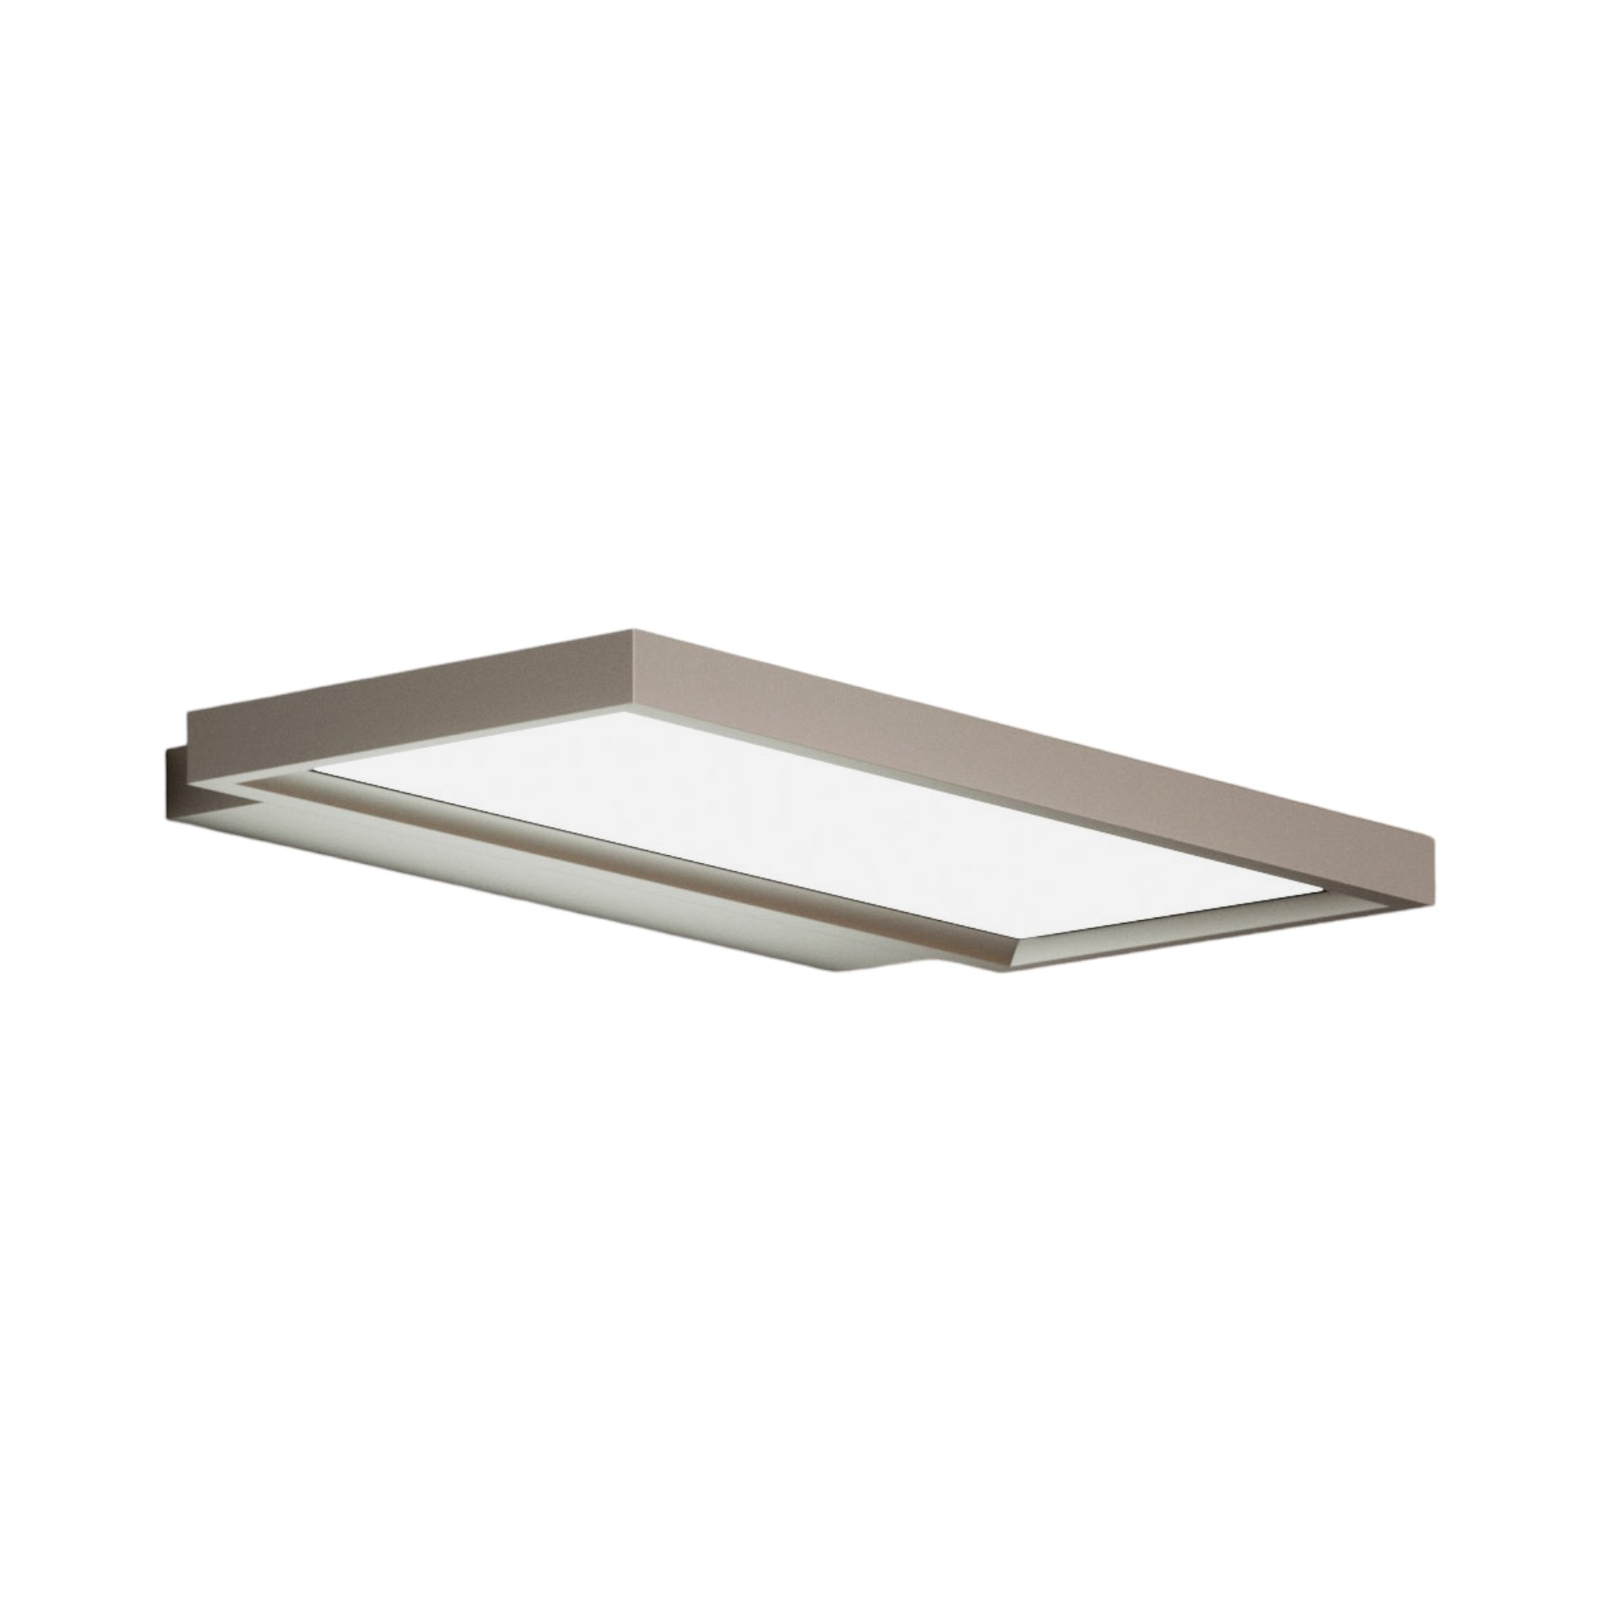 Rick LED office wall light, grey, cool white